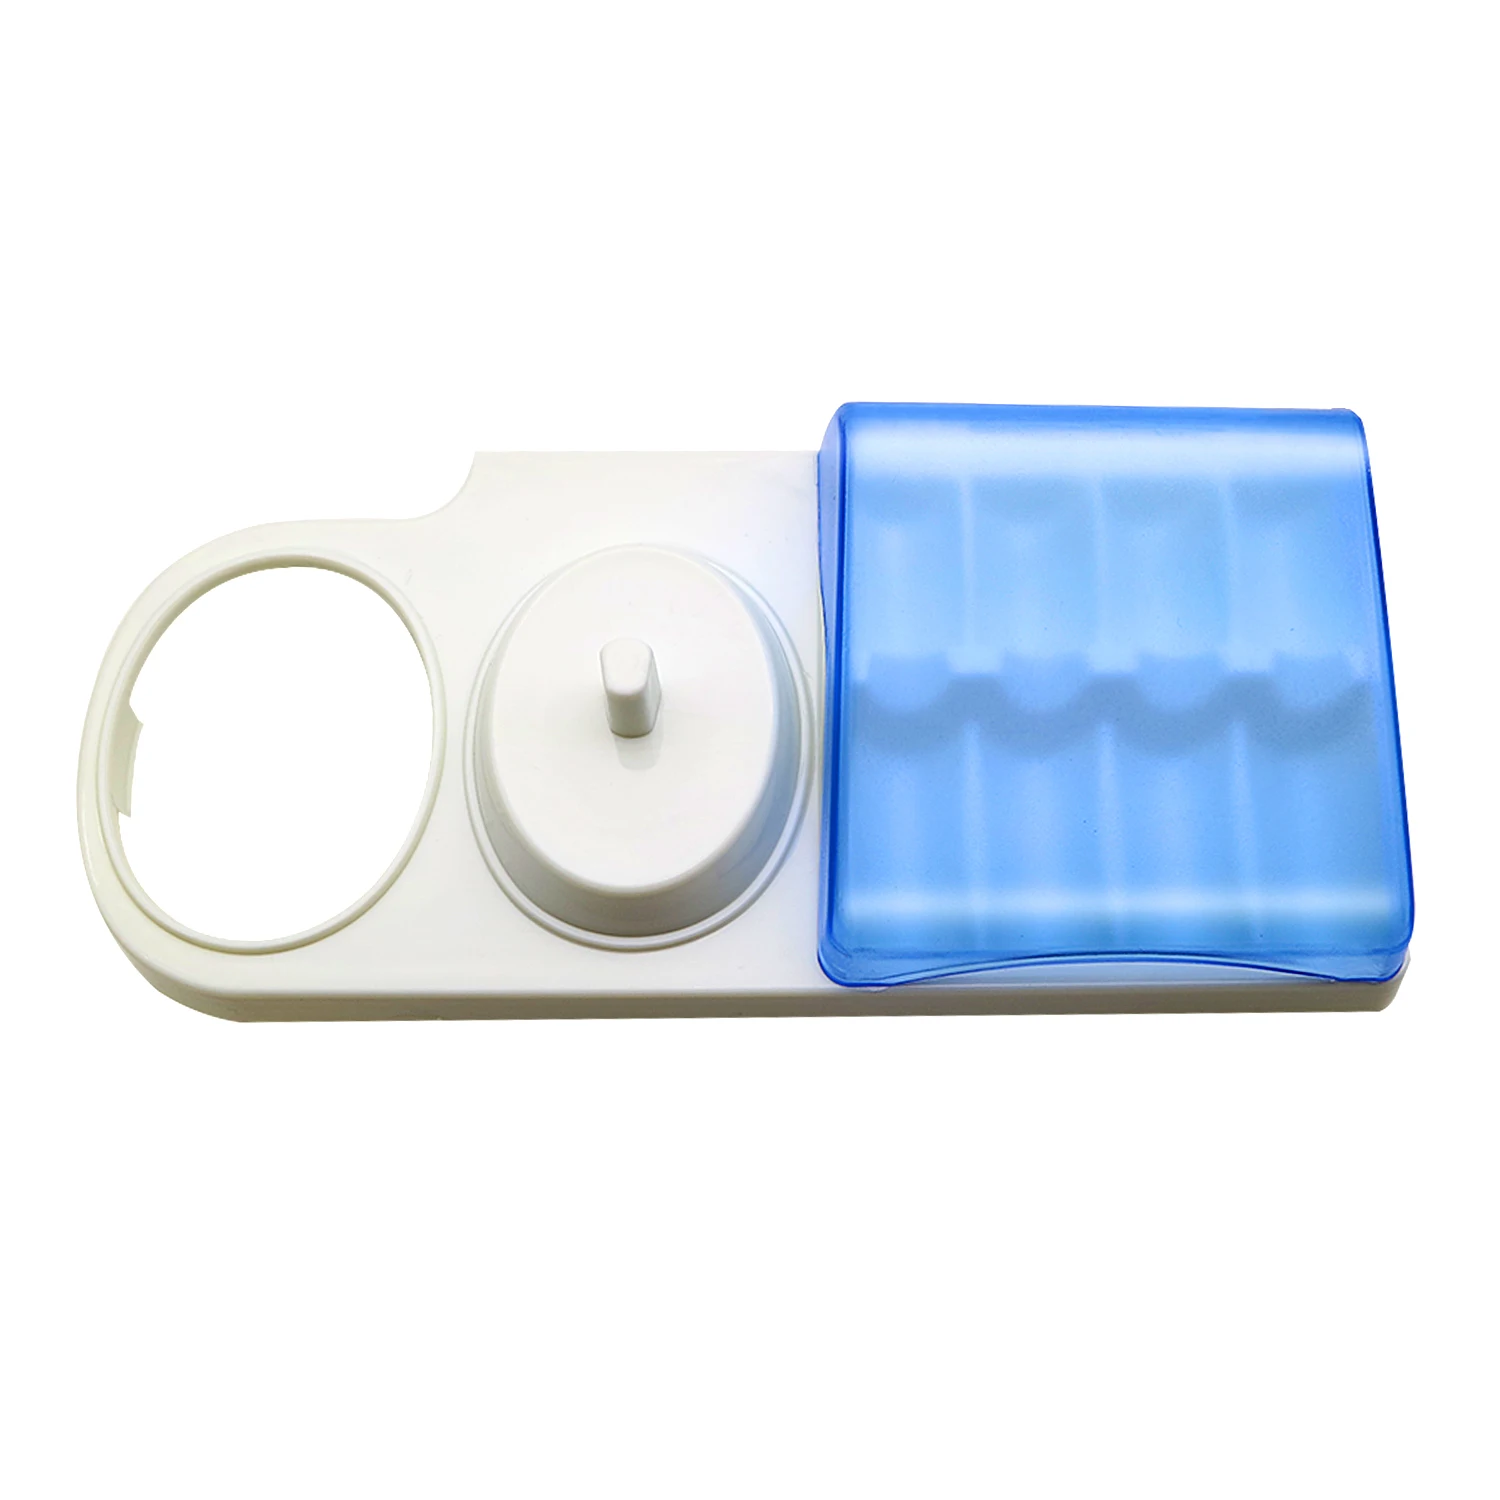 New Portable Brush Head Plastic Support Holder For Oral-B Electric Toothbrush Stand D12 D20 D17 D18 D29 D34 Pro 1000 600 690 700